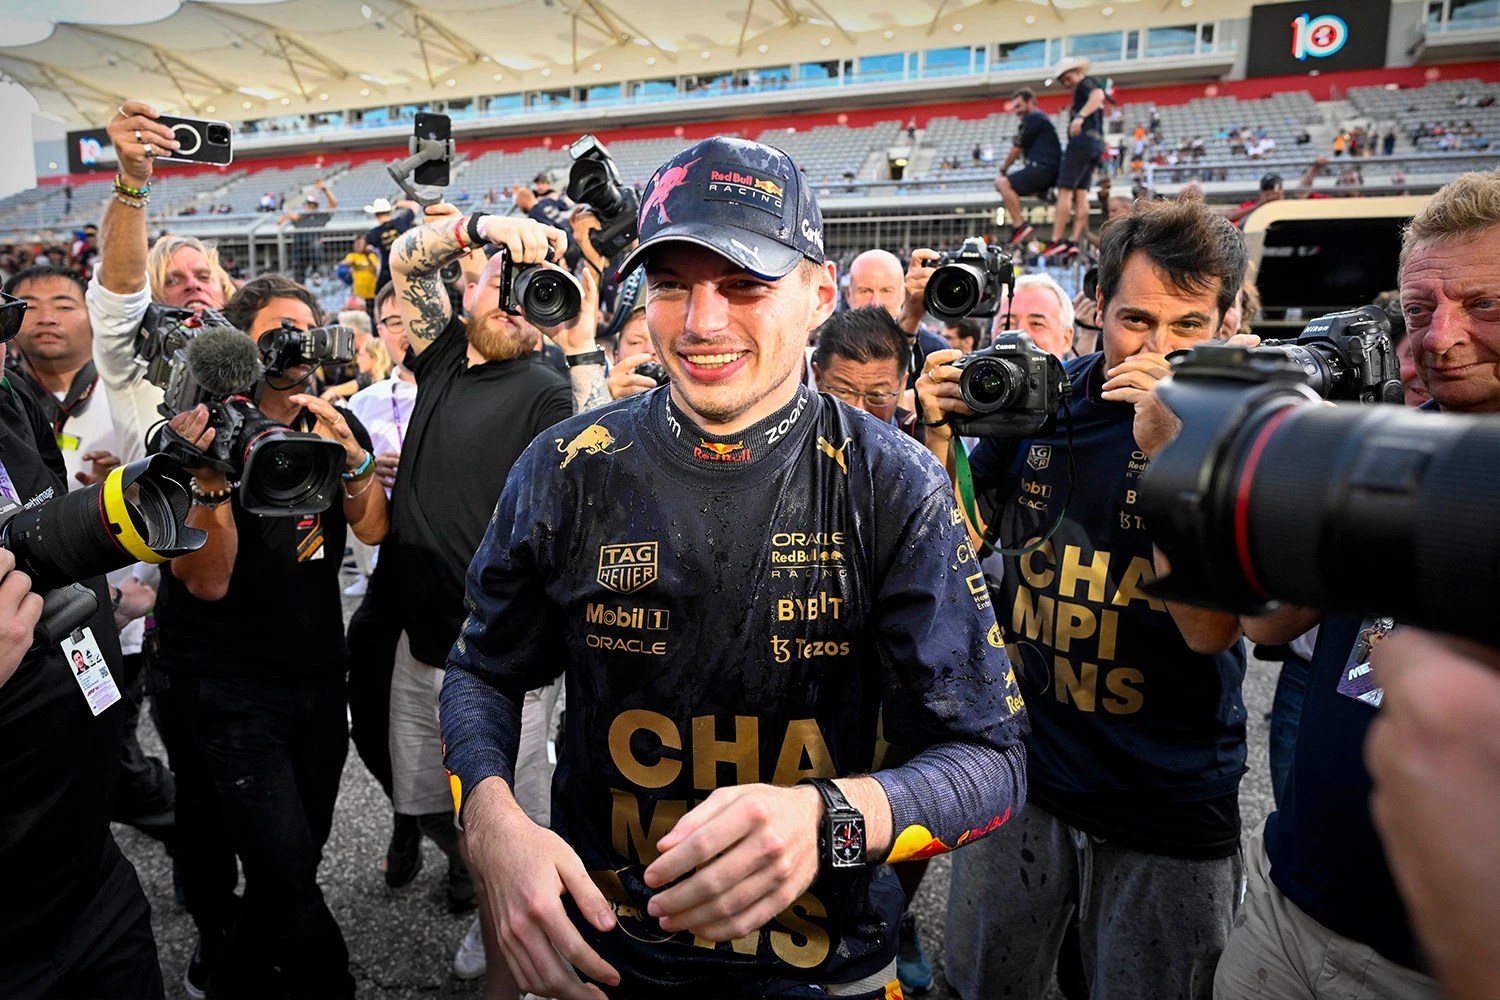 Max Verstappen surrounded by photographers after winning Formula 1 race